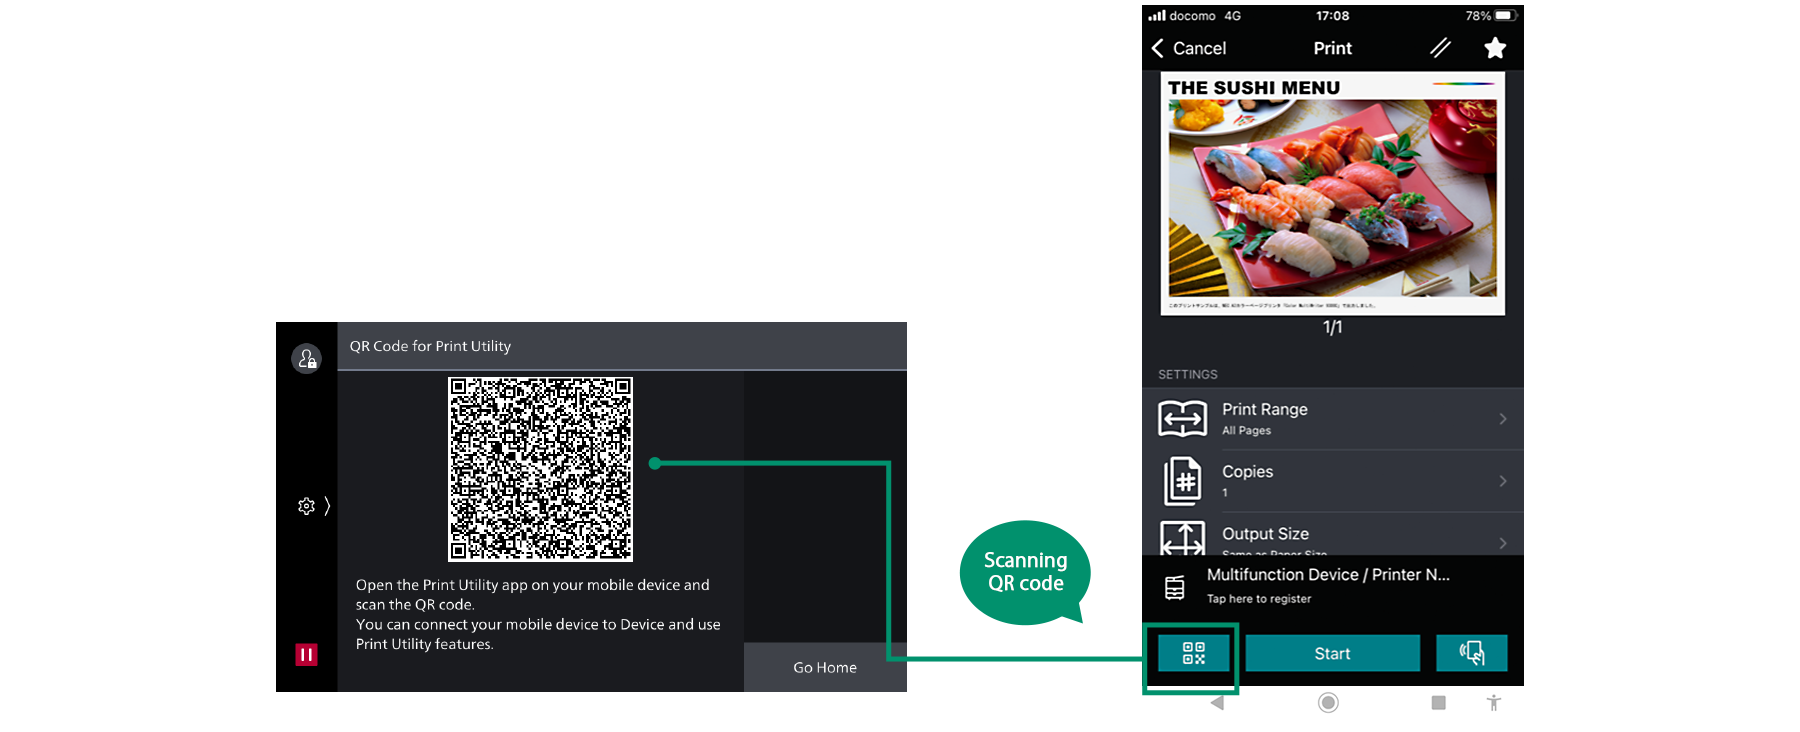 Easy to set up Wi-Fi connection by using QR code